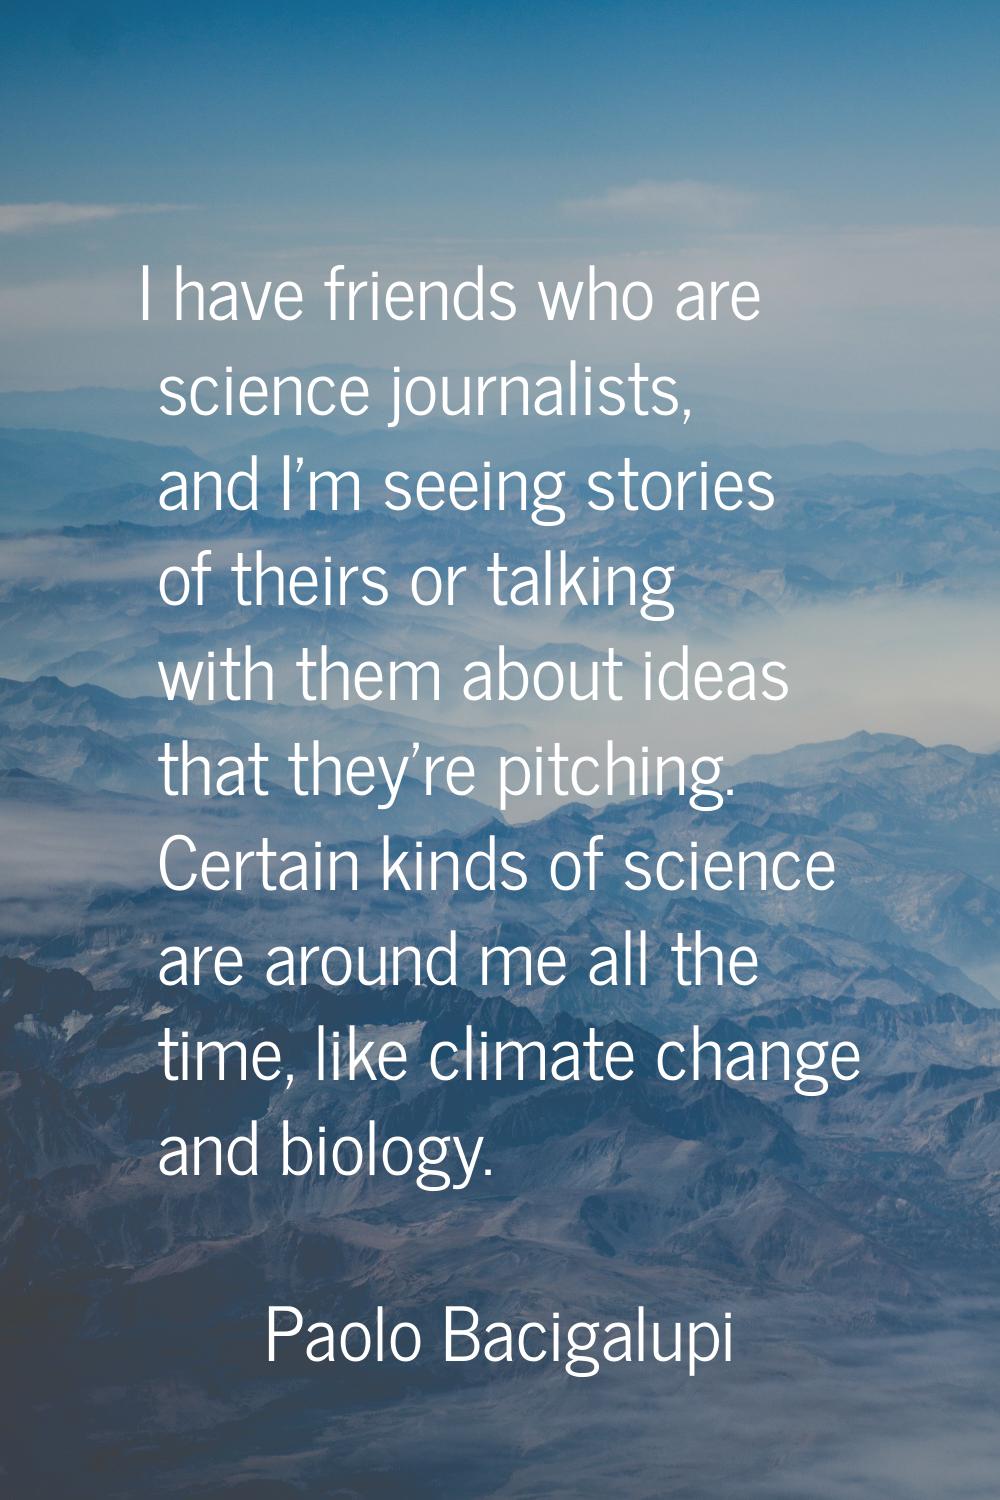 I have friends who are science journalists, and I'm seeing stories of theirs or talking with them a